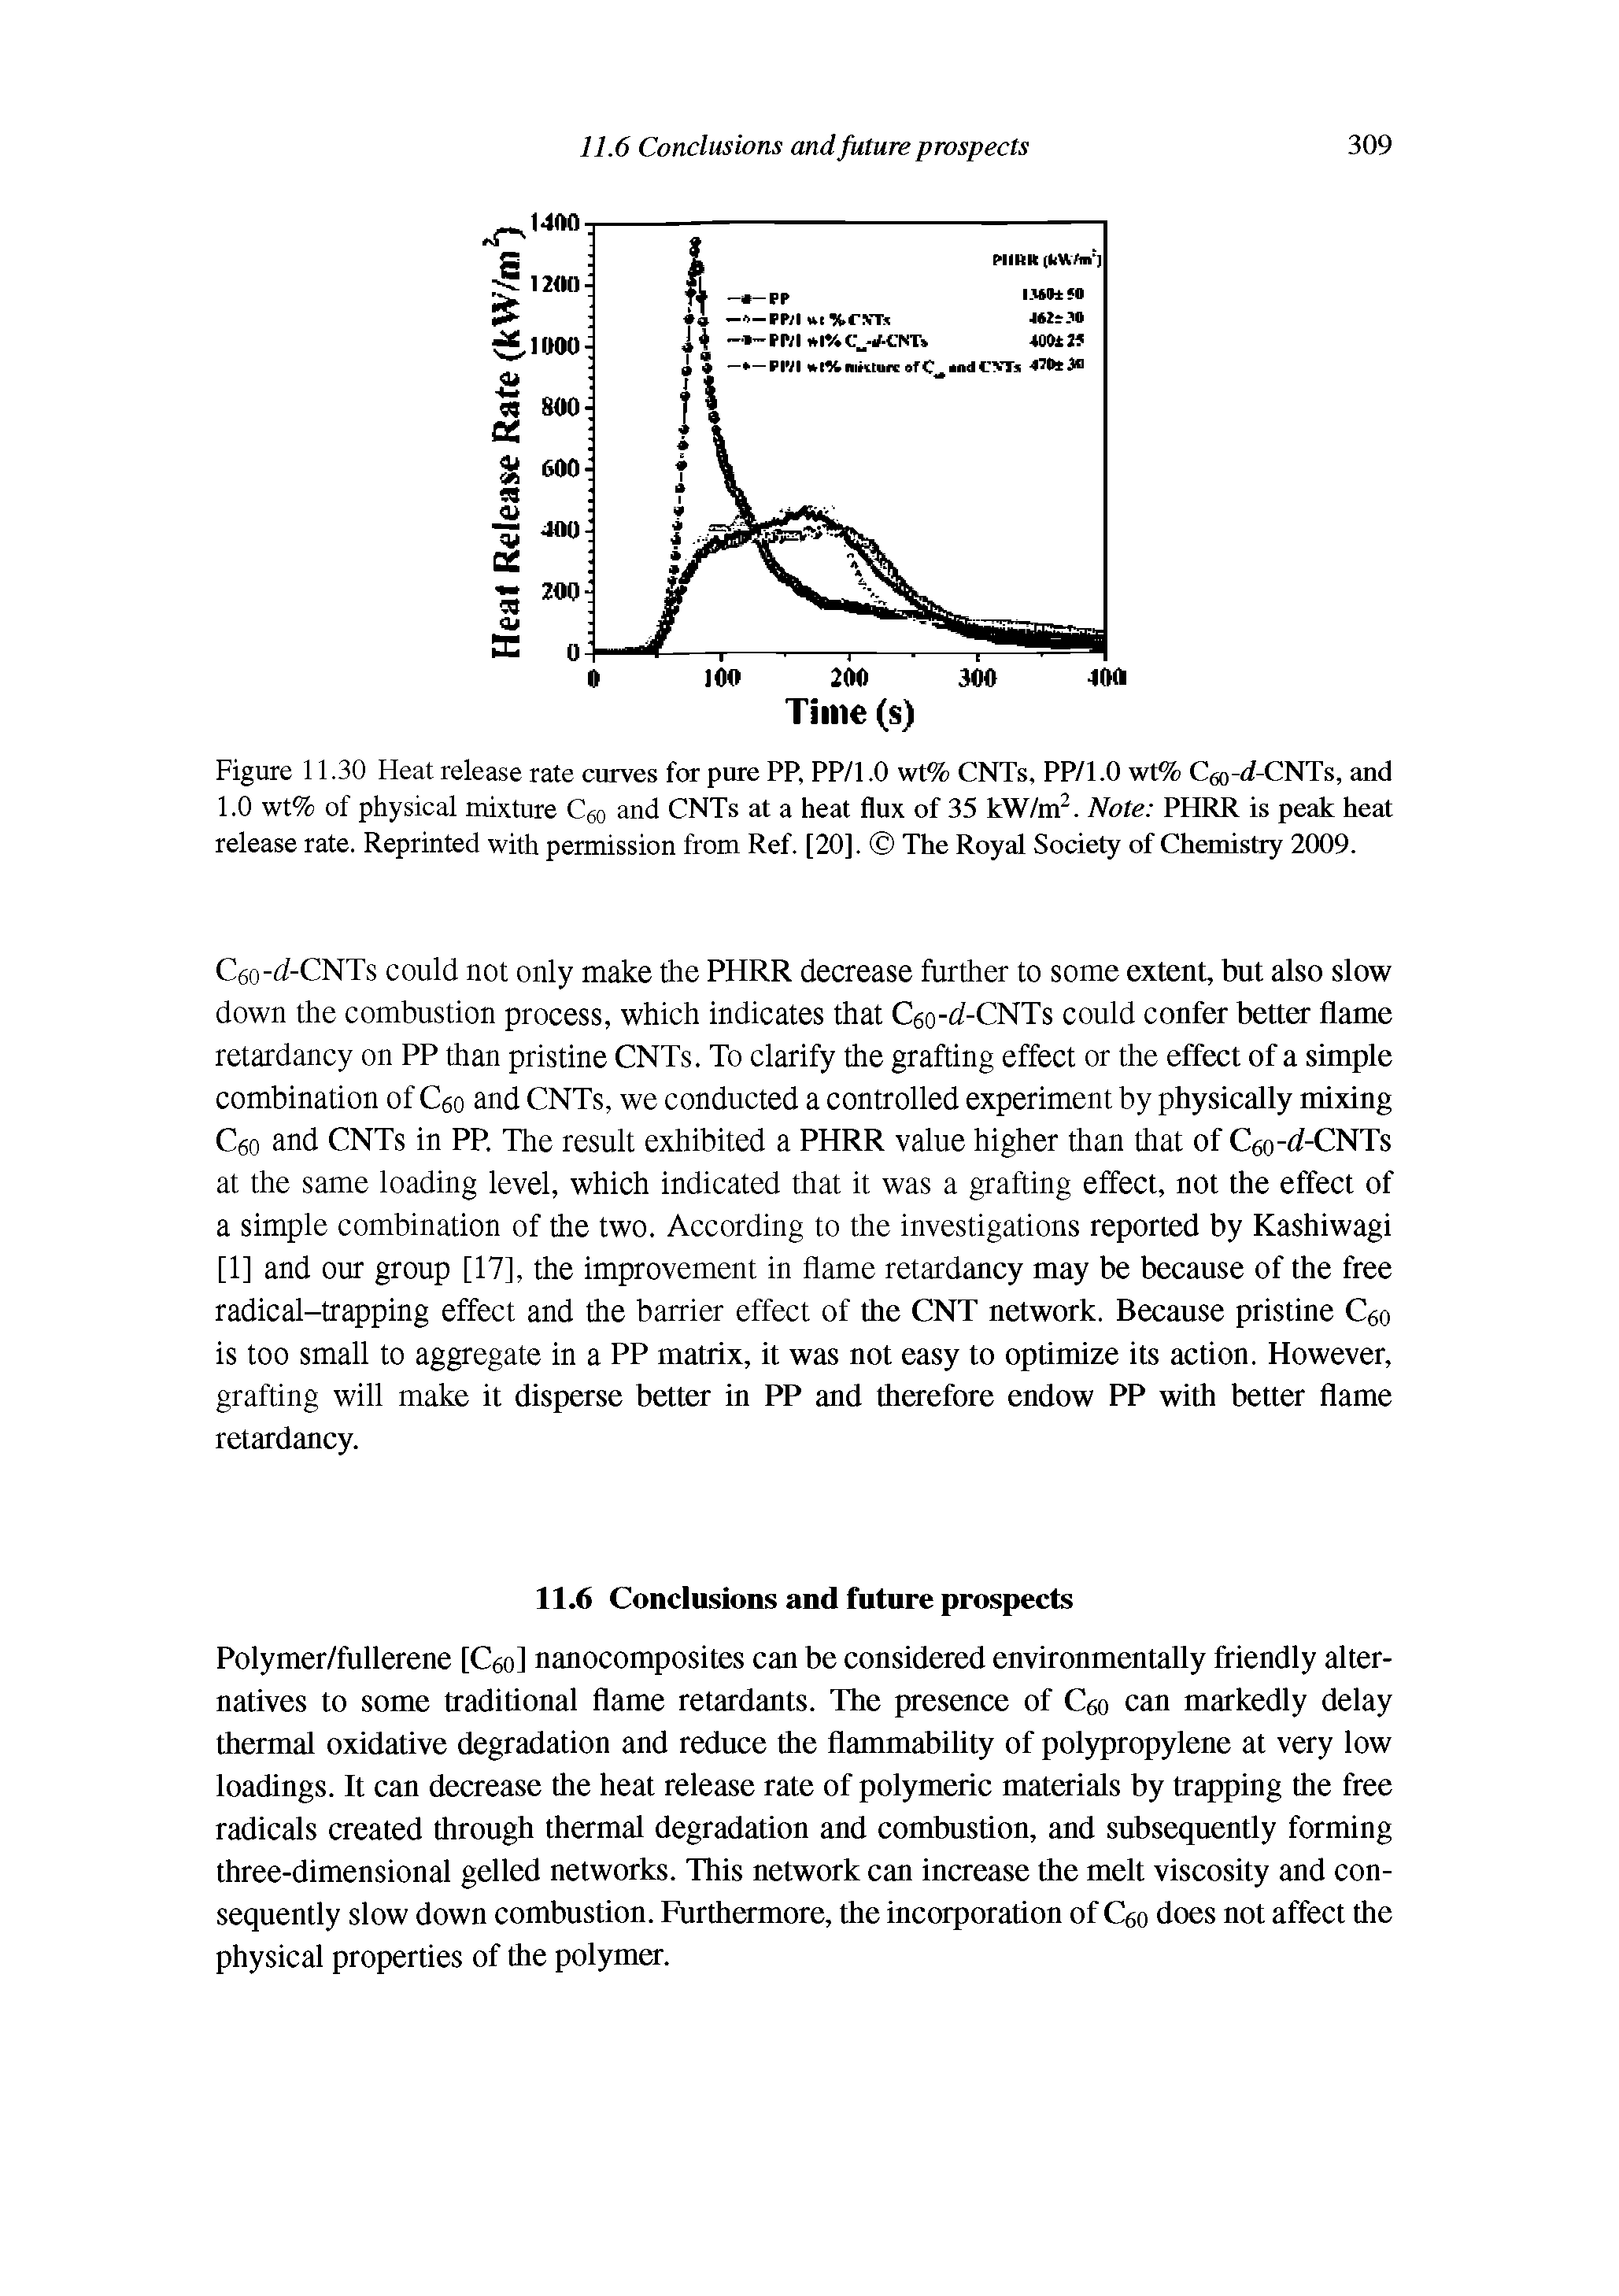 Figure 11.30 Heat release rate curves for pure PP, PP/1.0 wt% CNTs, PP/1.0 wt% Cgo- f-CNTs, and 1.0 wt% of physical mixture C o and CNTs at a heat flux of 35 kW/m. Note PHRR is peak heat release rate. Reprinted with permission from Ref. [20]. The Royal Society of Chemistry 2009.